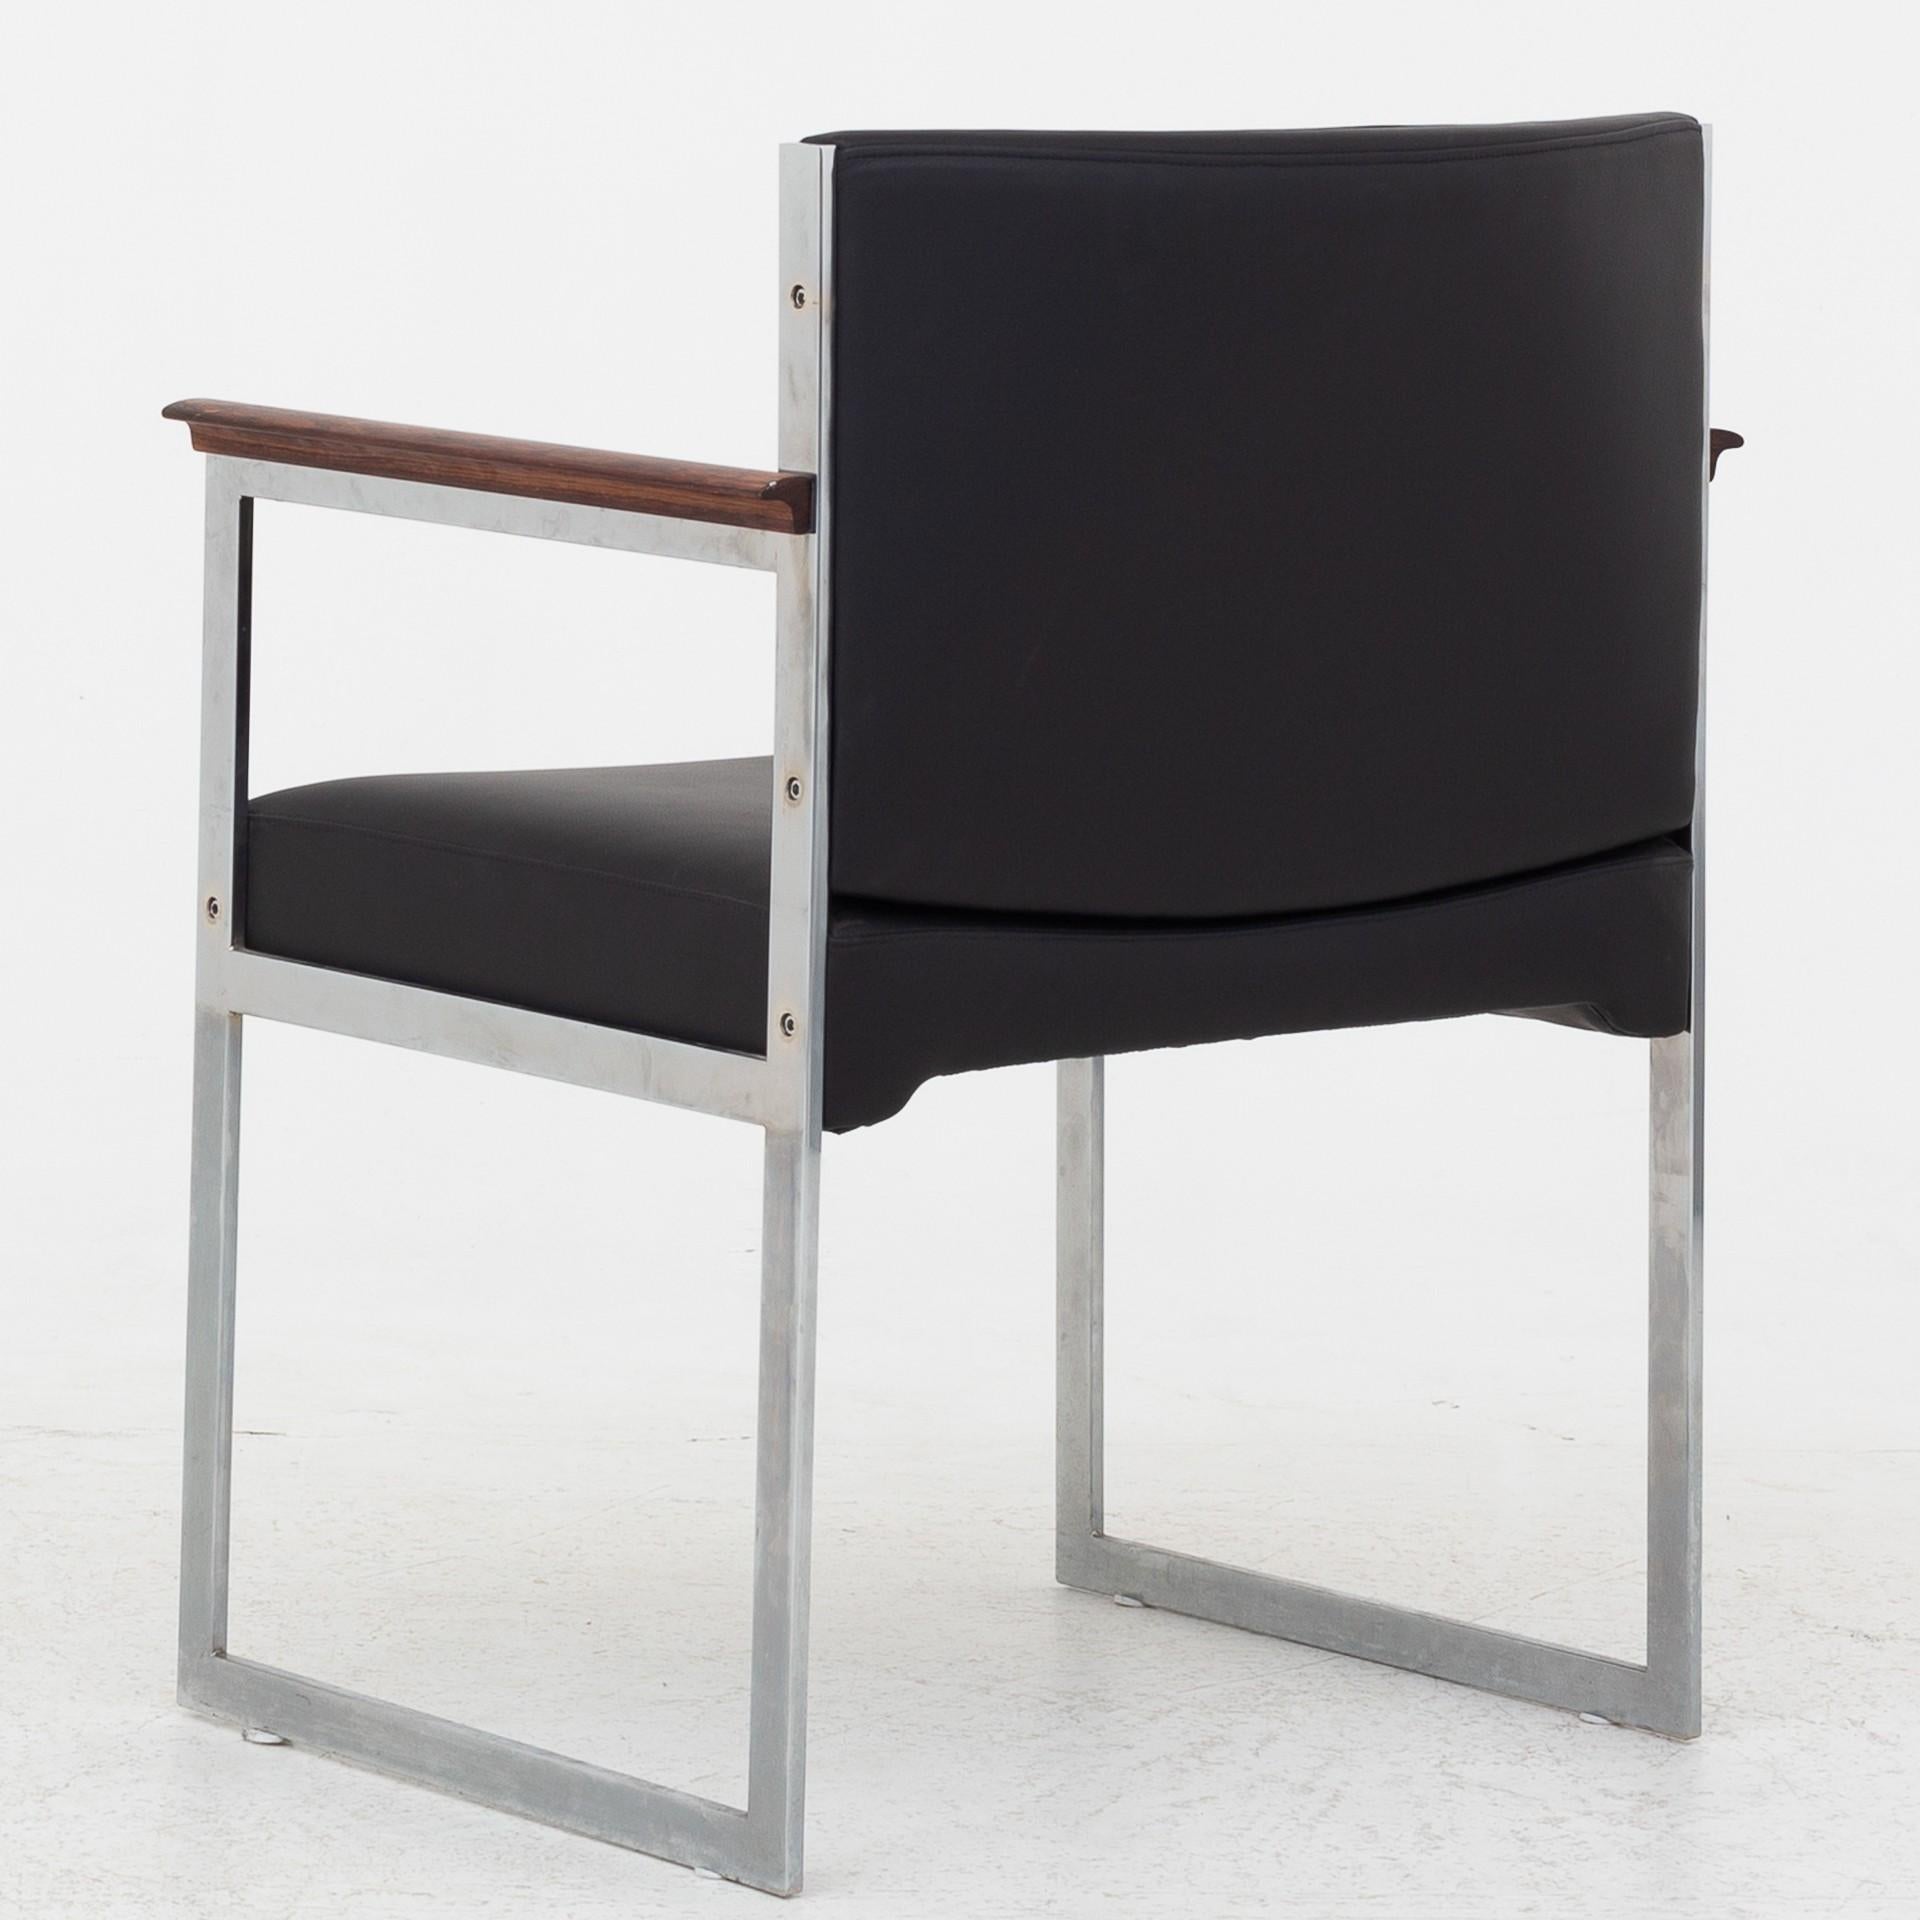 Set of 8 armchair with chromed steel frame, armrest in rosewood and seat of new, black leather. Maker P. Schultz.